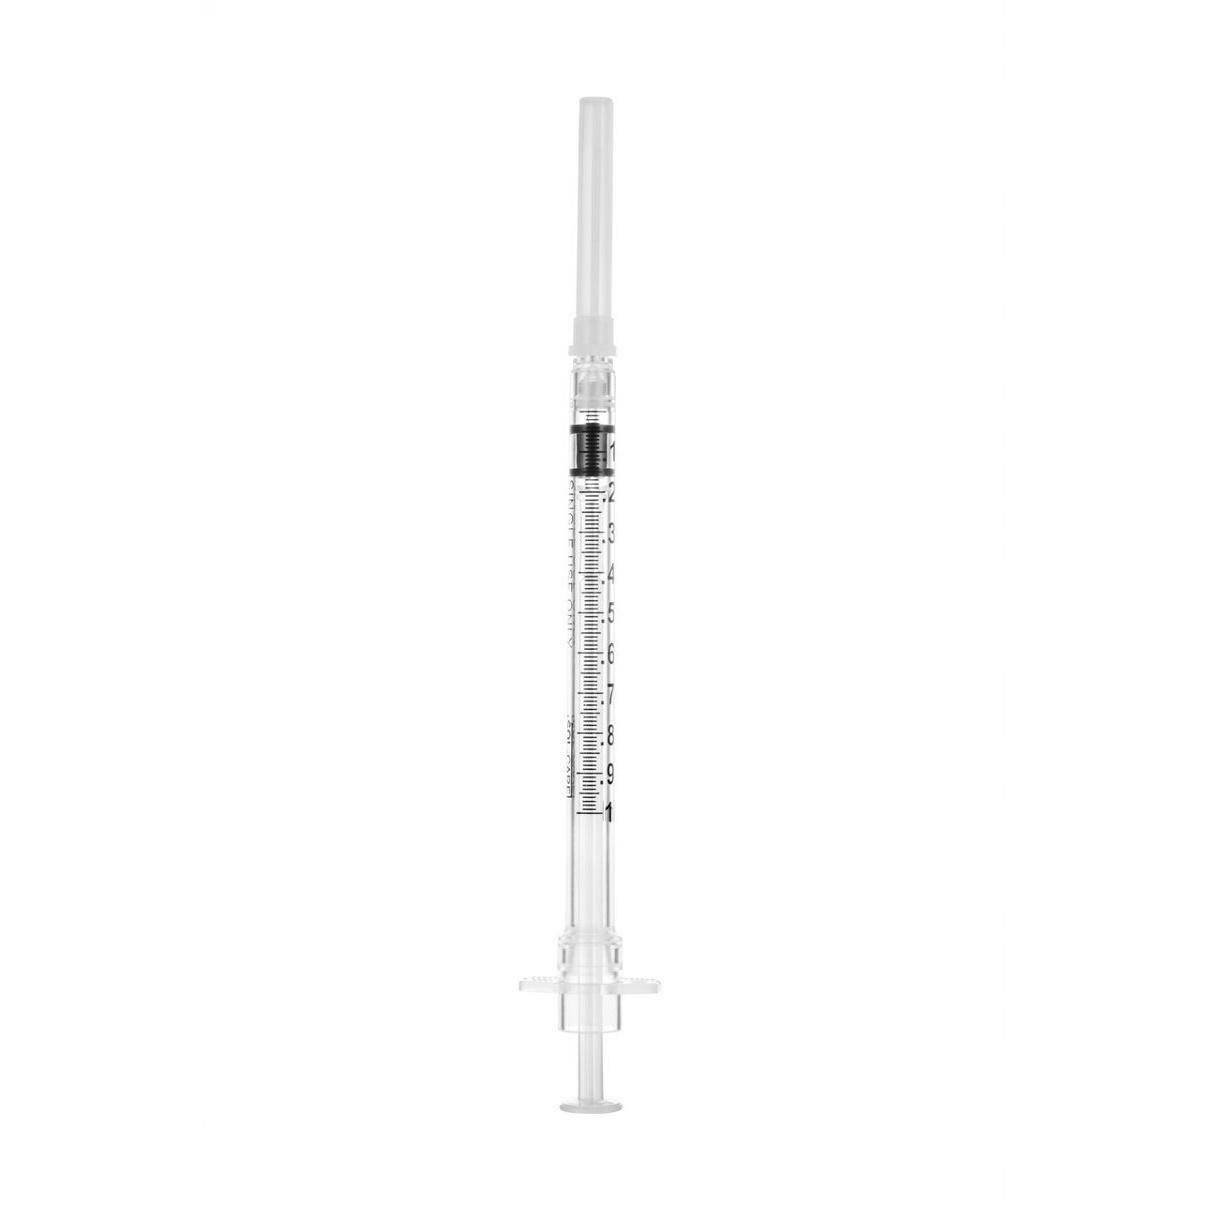 1ml 26g 3/8 inch Sol-Care Safety Syringe with Fixed Needle